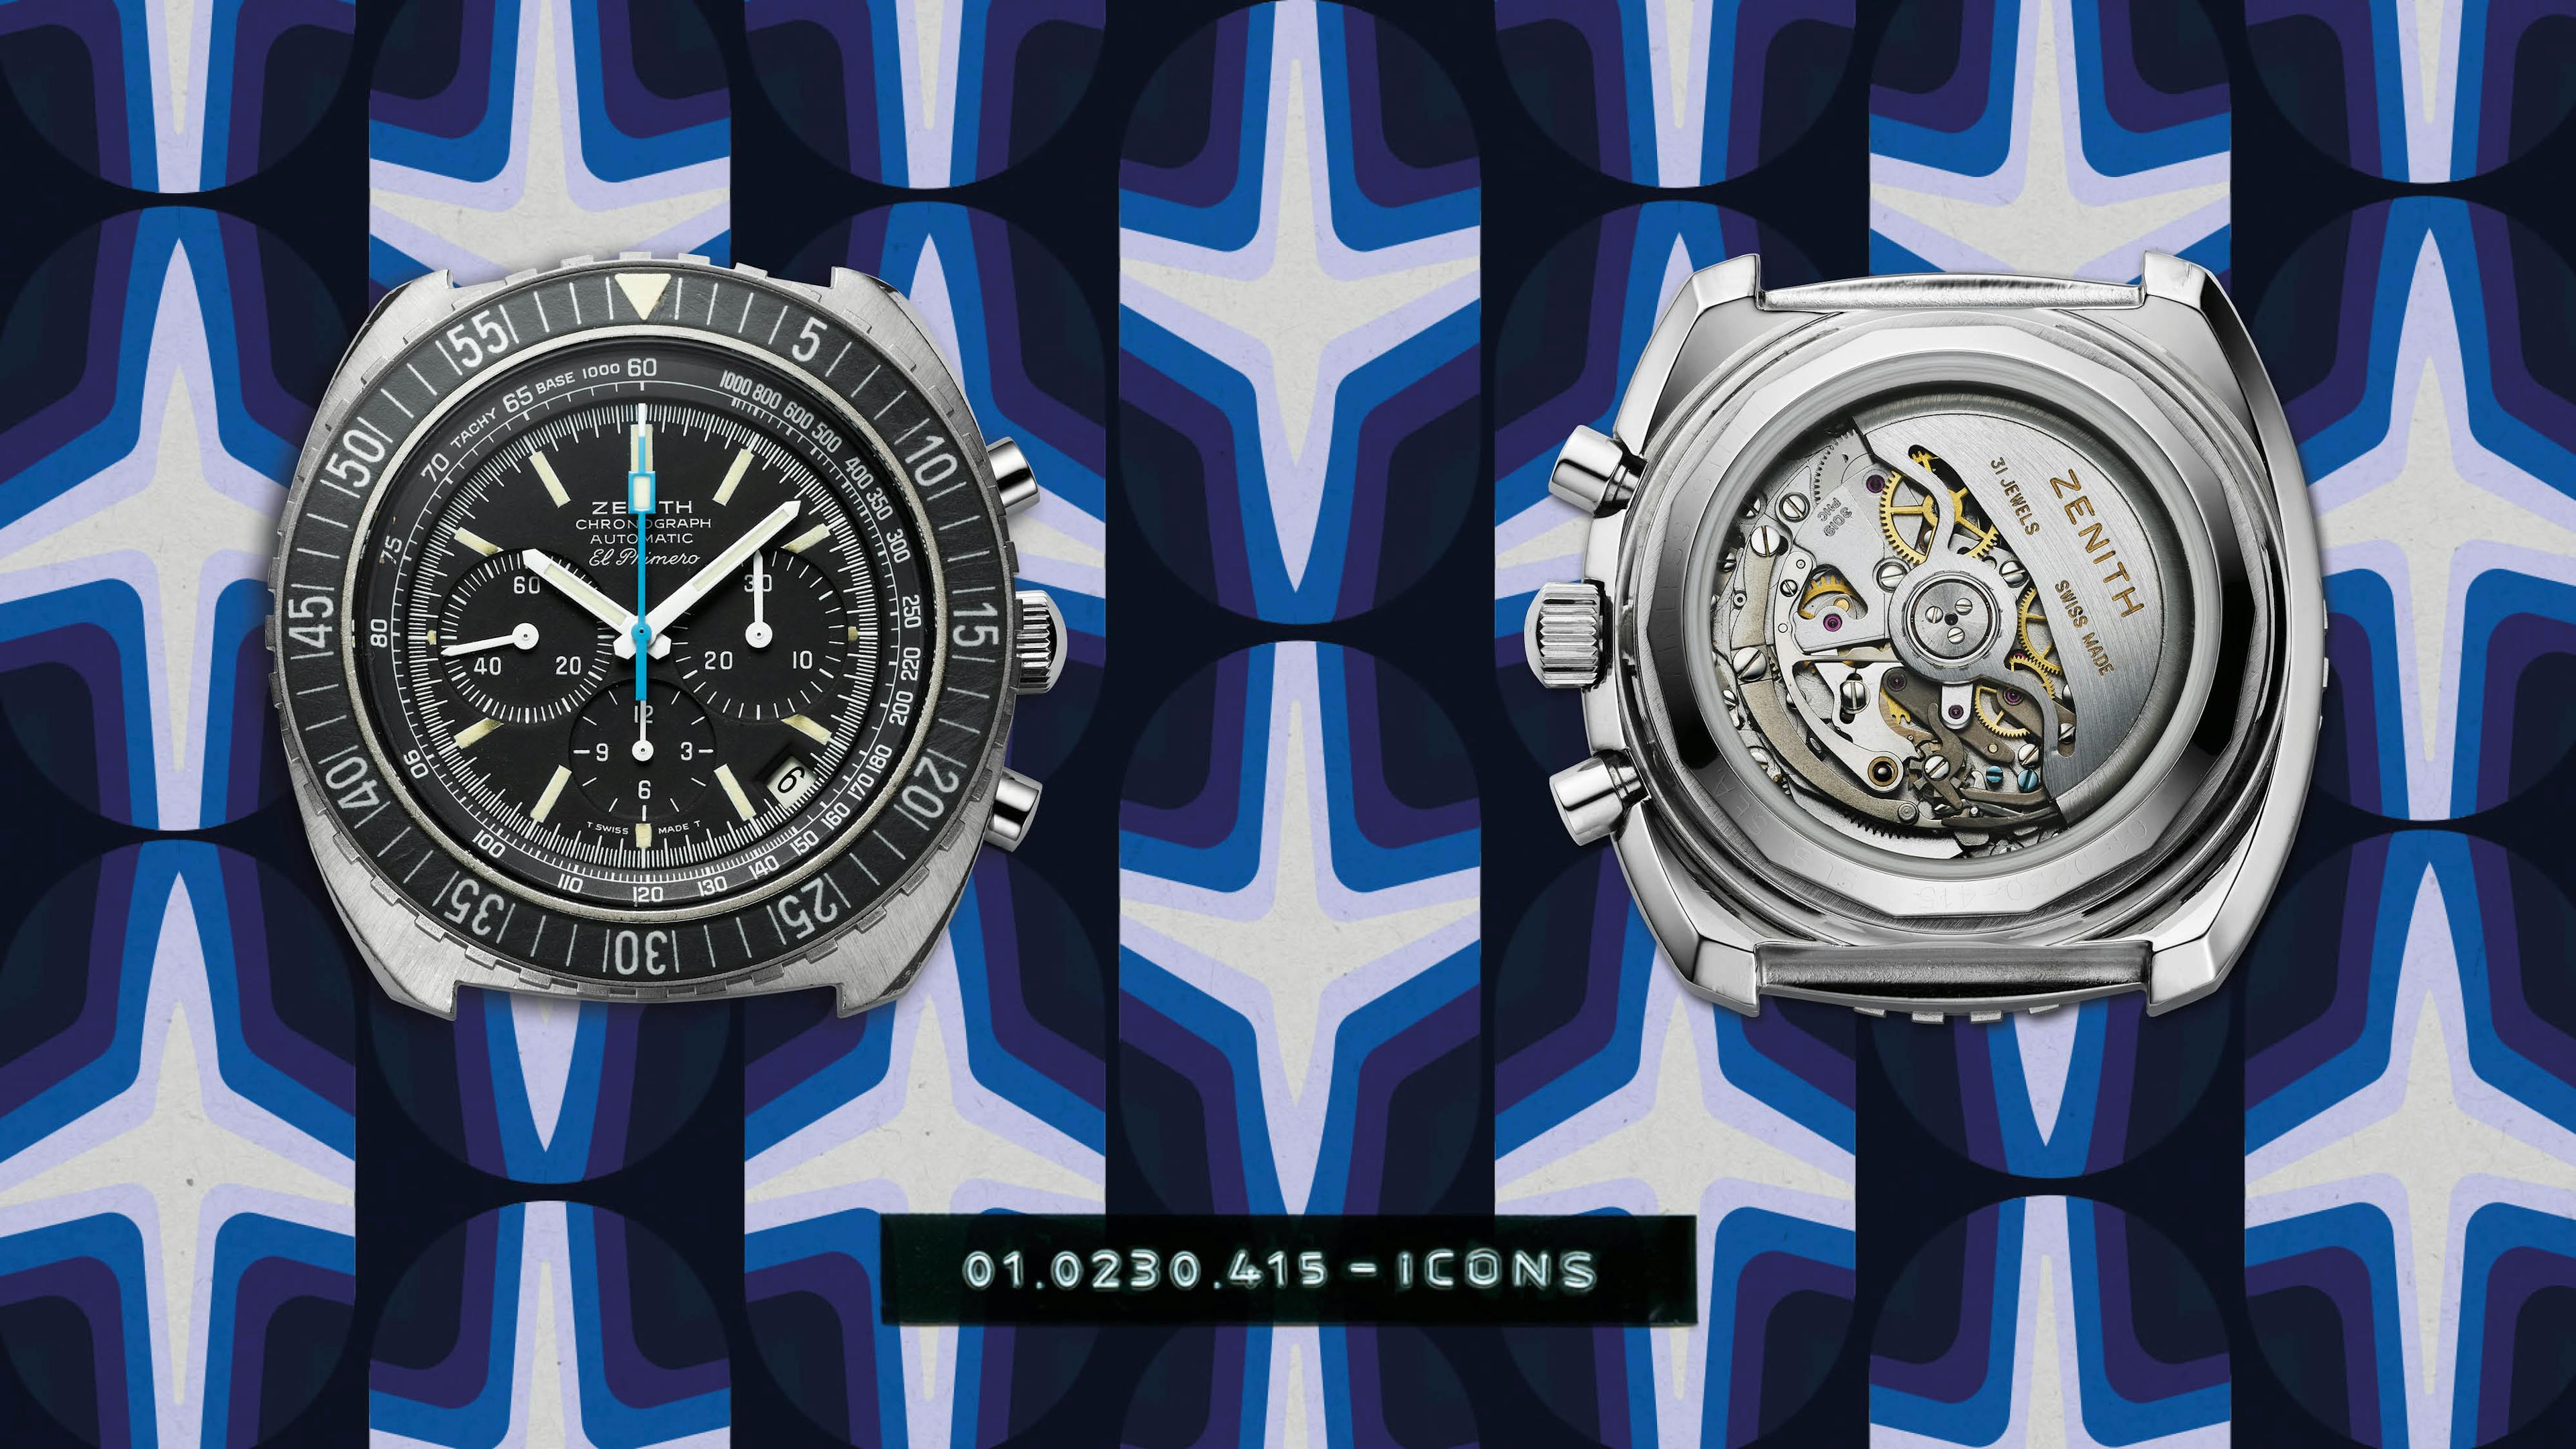 Cover Zenith unveils first ICONS: PILOT capsule collection